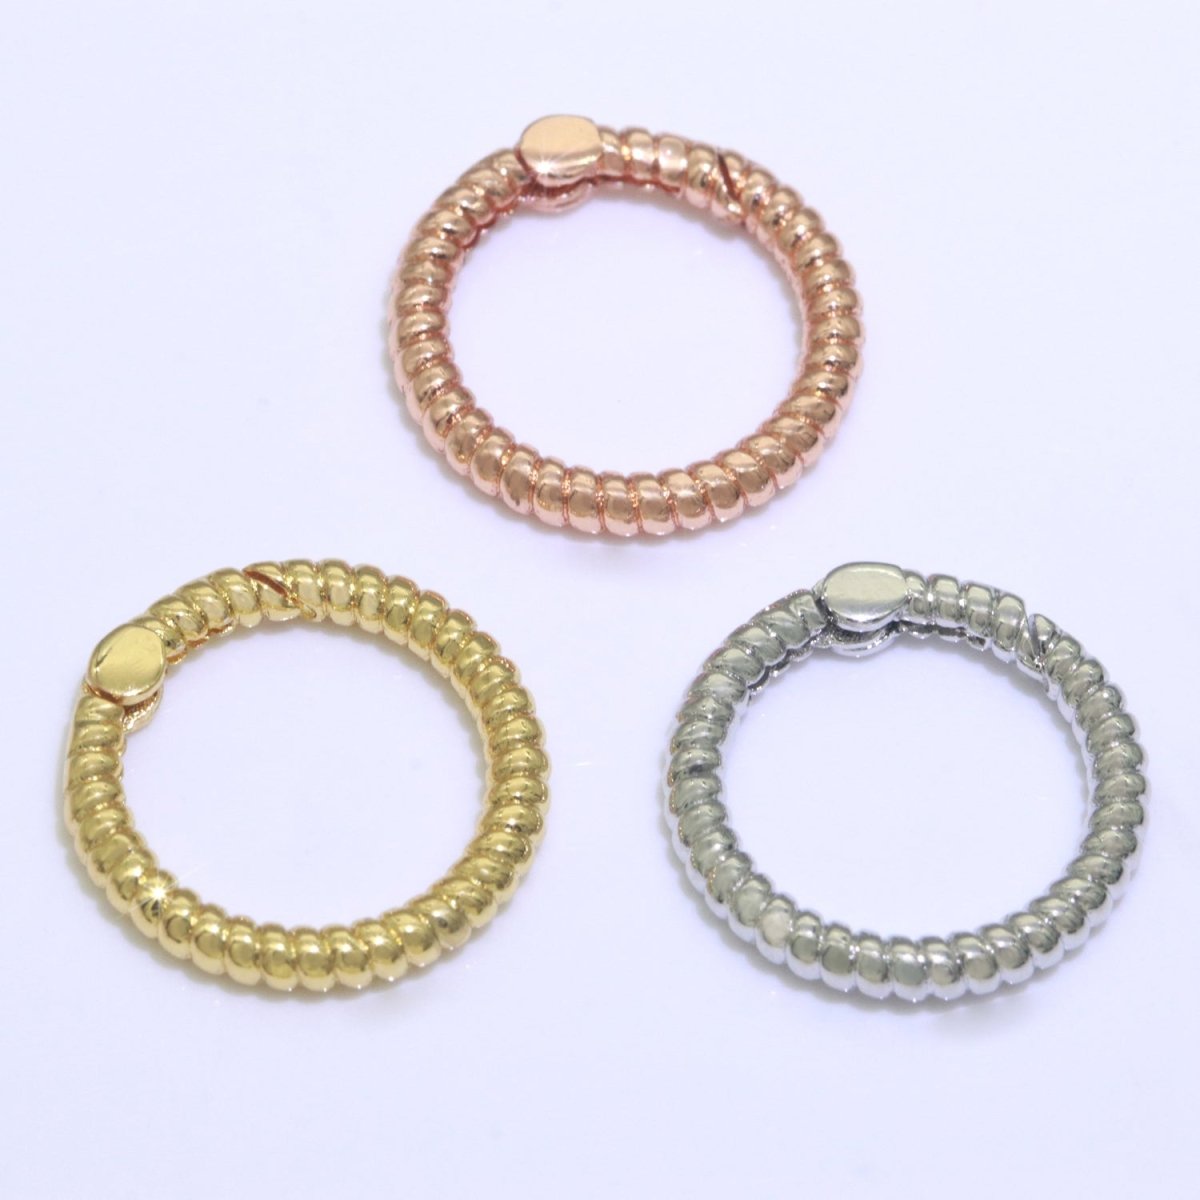 Twisted Gold Spring Gate Ring, 16 mm Marine Rope Push Gate ring, Charm Holder Clasp for Connector Bracelet End Clasp Rose Gold Silver L-448 L-449 L-450 - DLUXCA